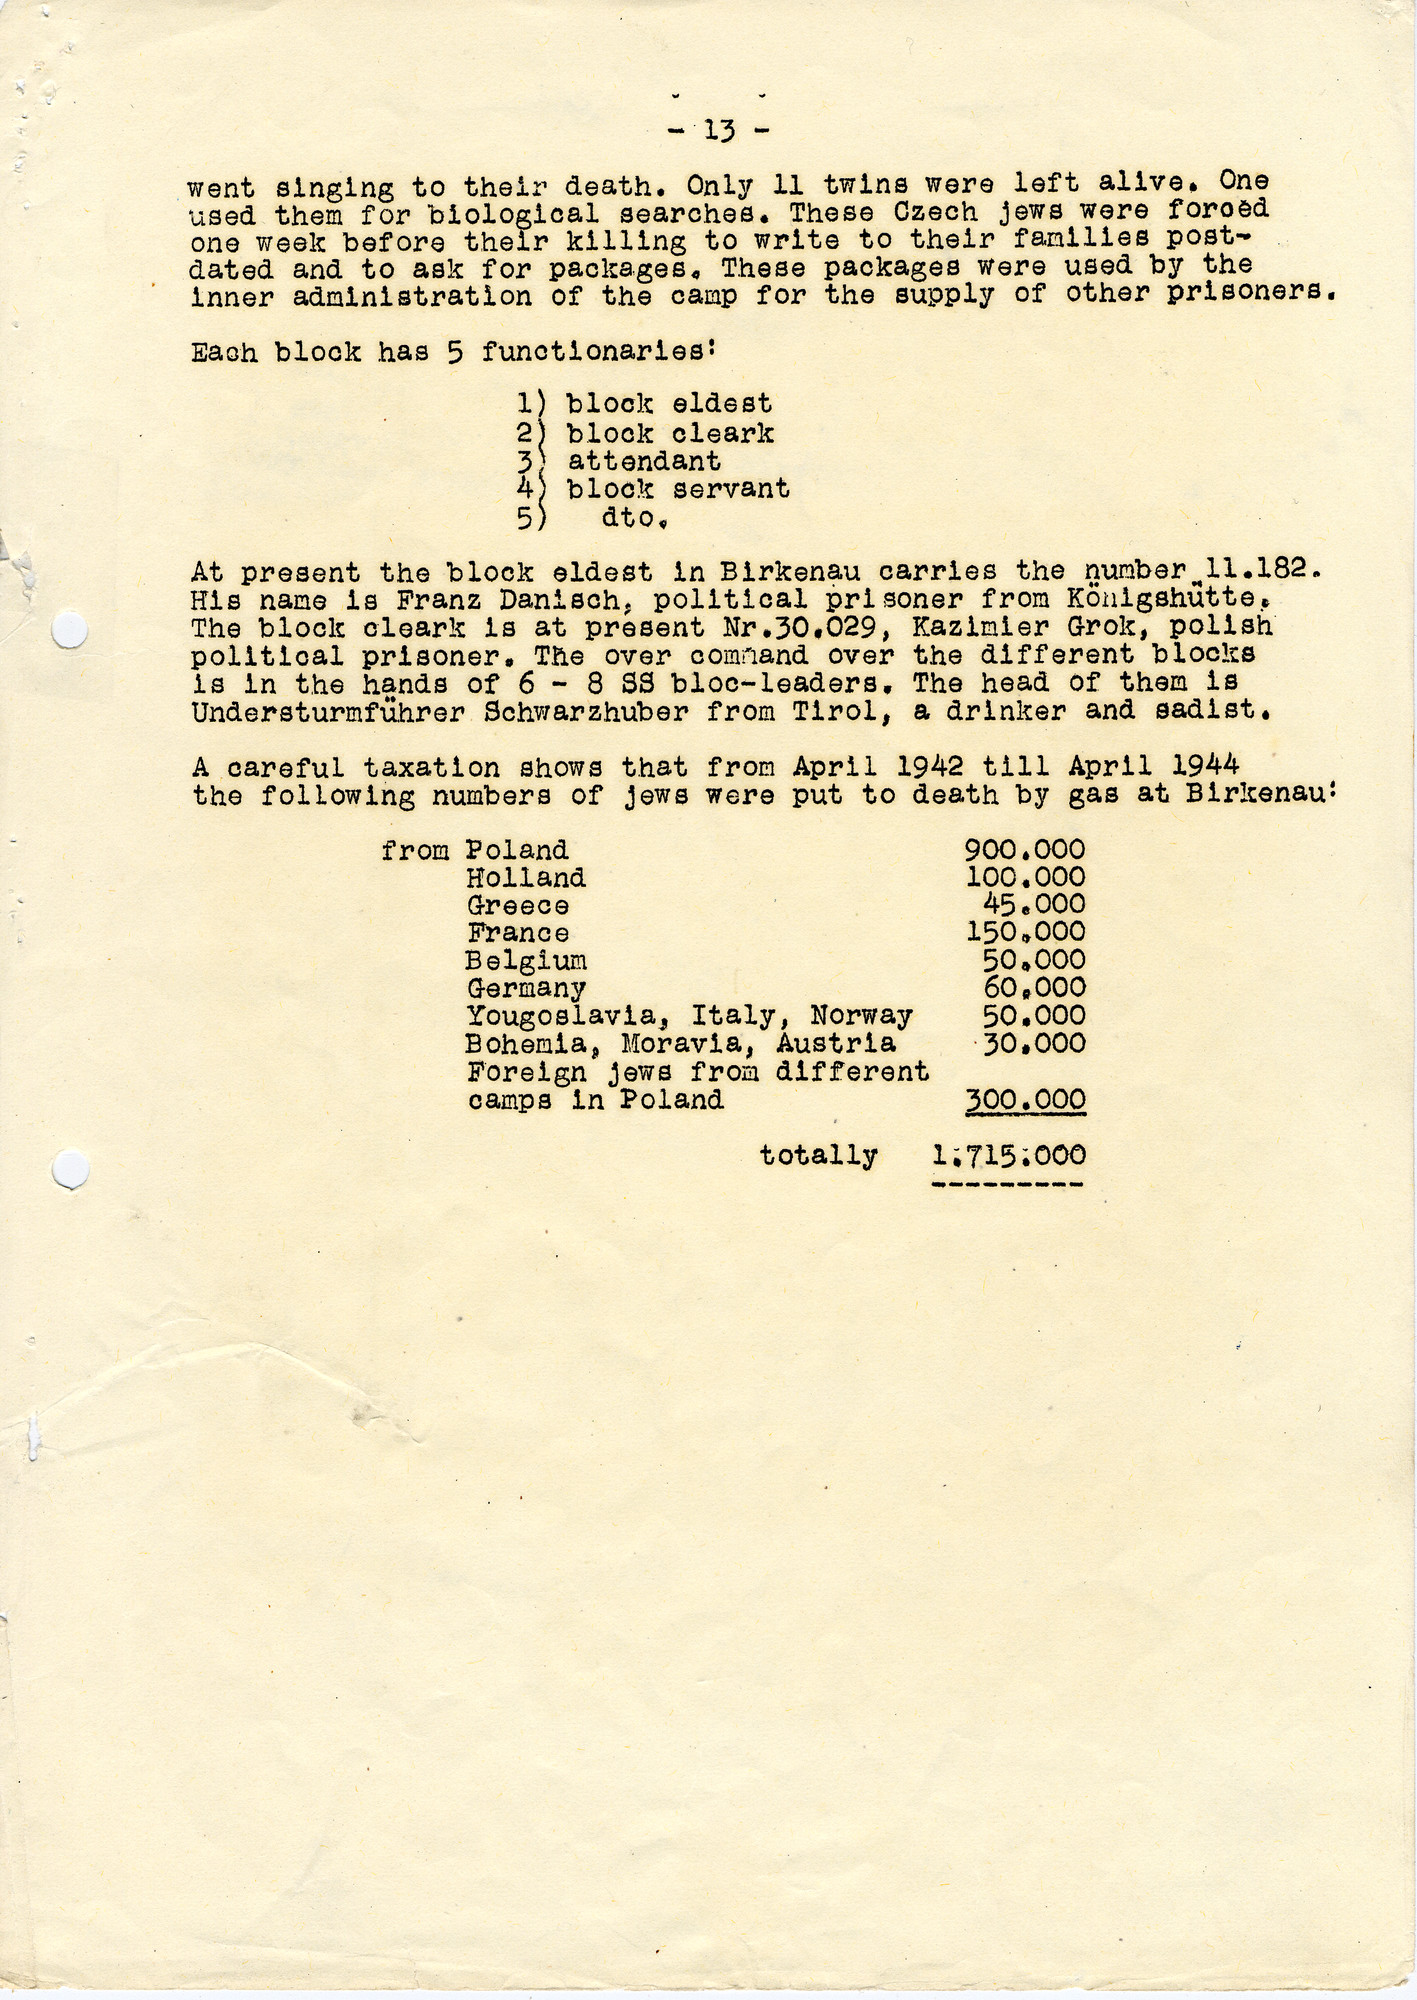 Abridged version of the Auschwitz Protocol sent .by Miklos Kraus in Budapest to George Mantello in Switzerland.

The document was translated into English by students hired by George Mandel-Mantello.